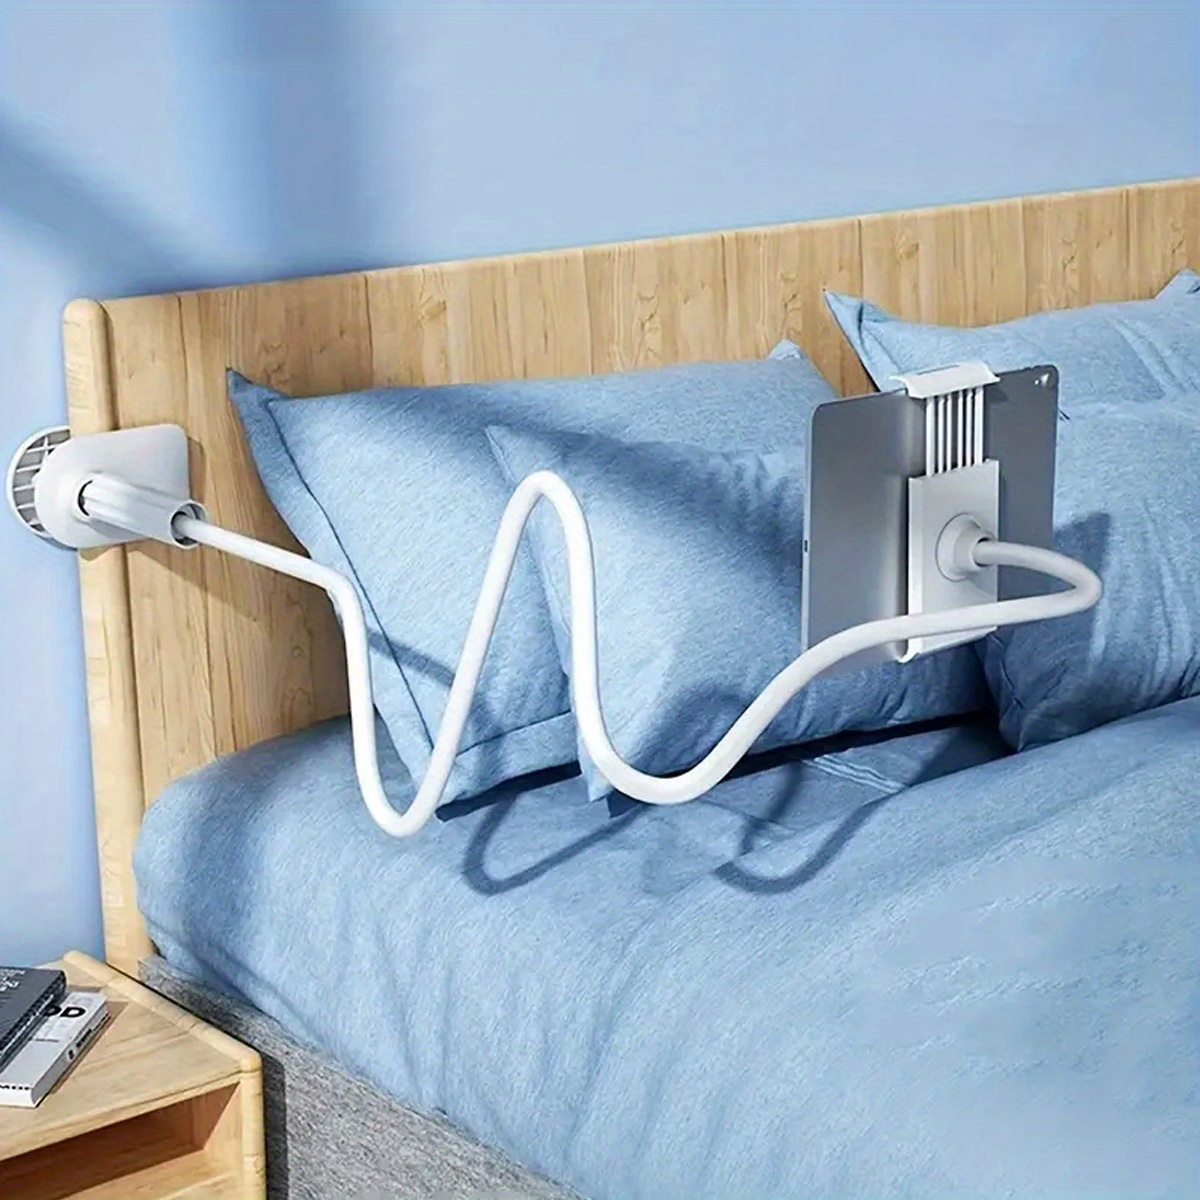 

360° Rotating Universal Tablet & Phone Stand: Flexible Spiral Base For Lazy Browsing - Perfect Bedside Companion For Tablets & Smartphones